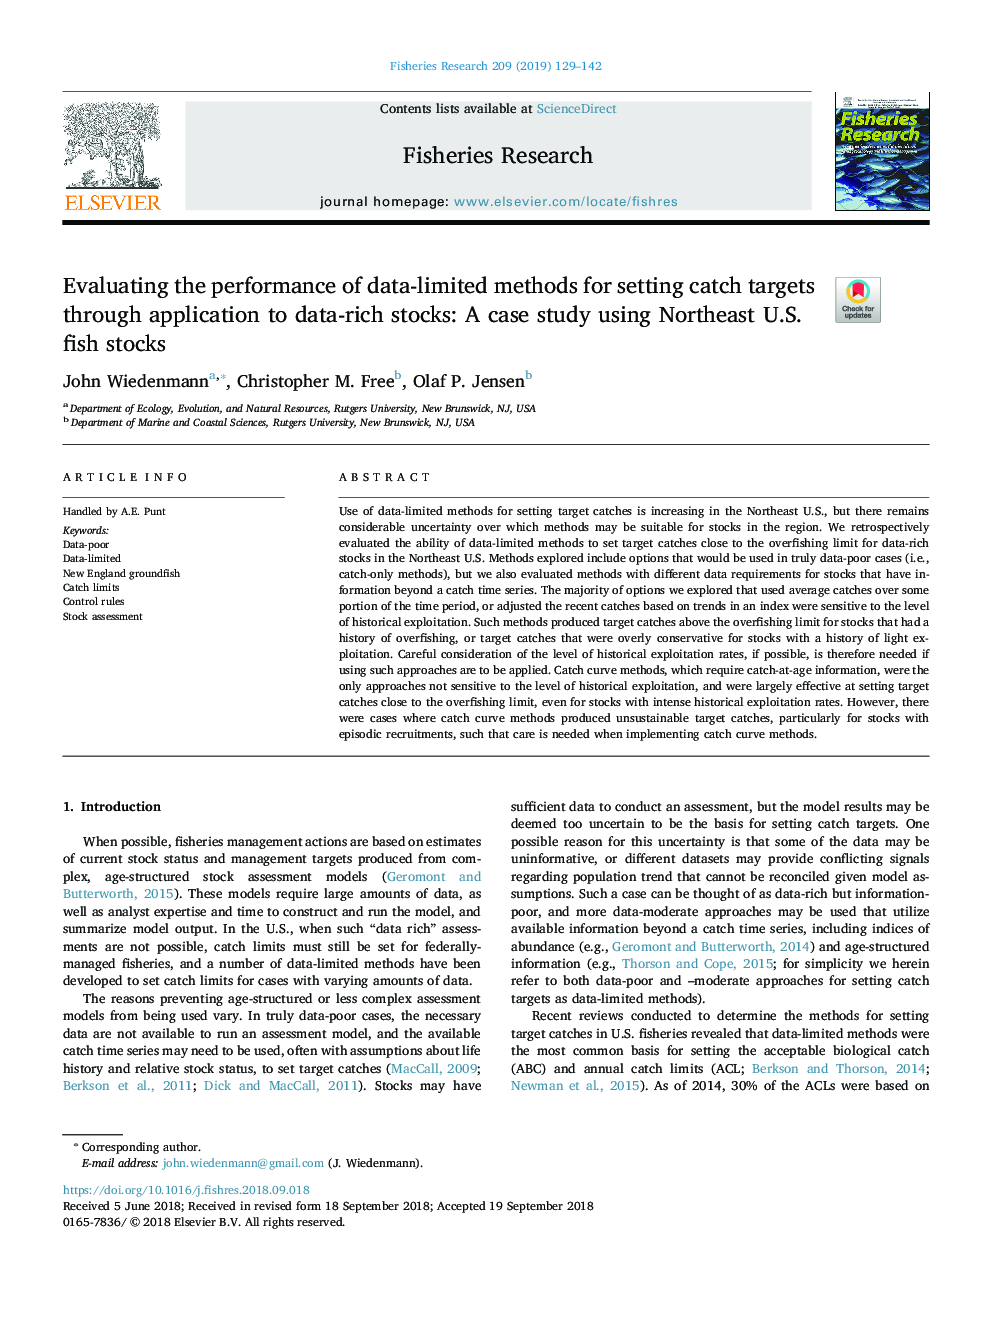 Evaluating the performance of data-limited methods for setting catch targets through application to data-rich stocks: A case study using Northeast U.S. fish stocks